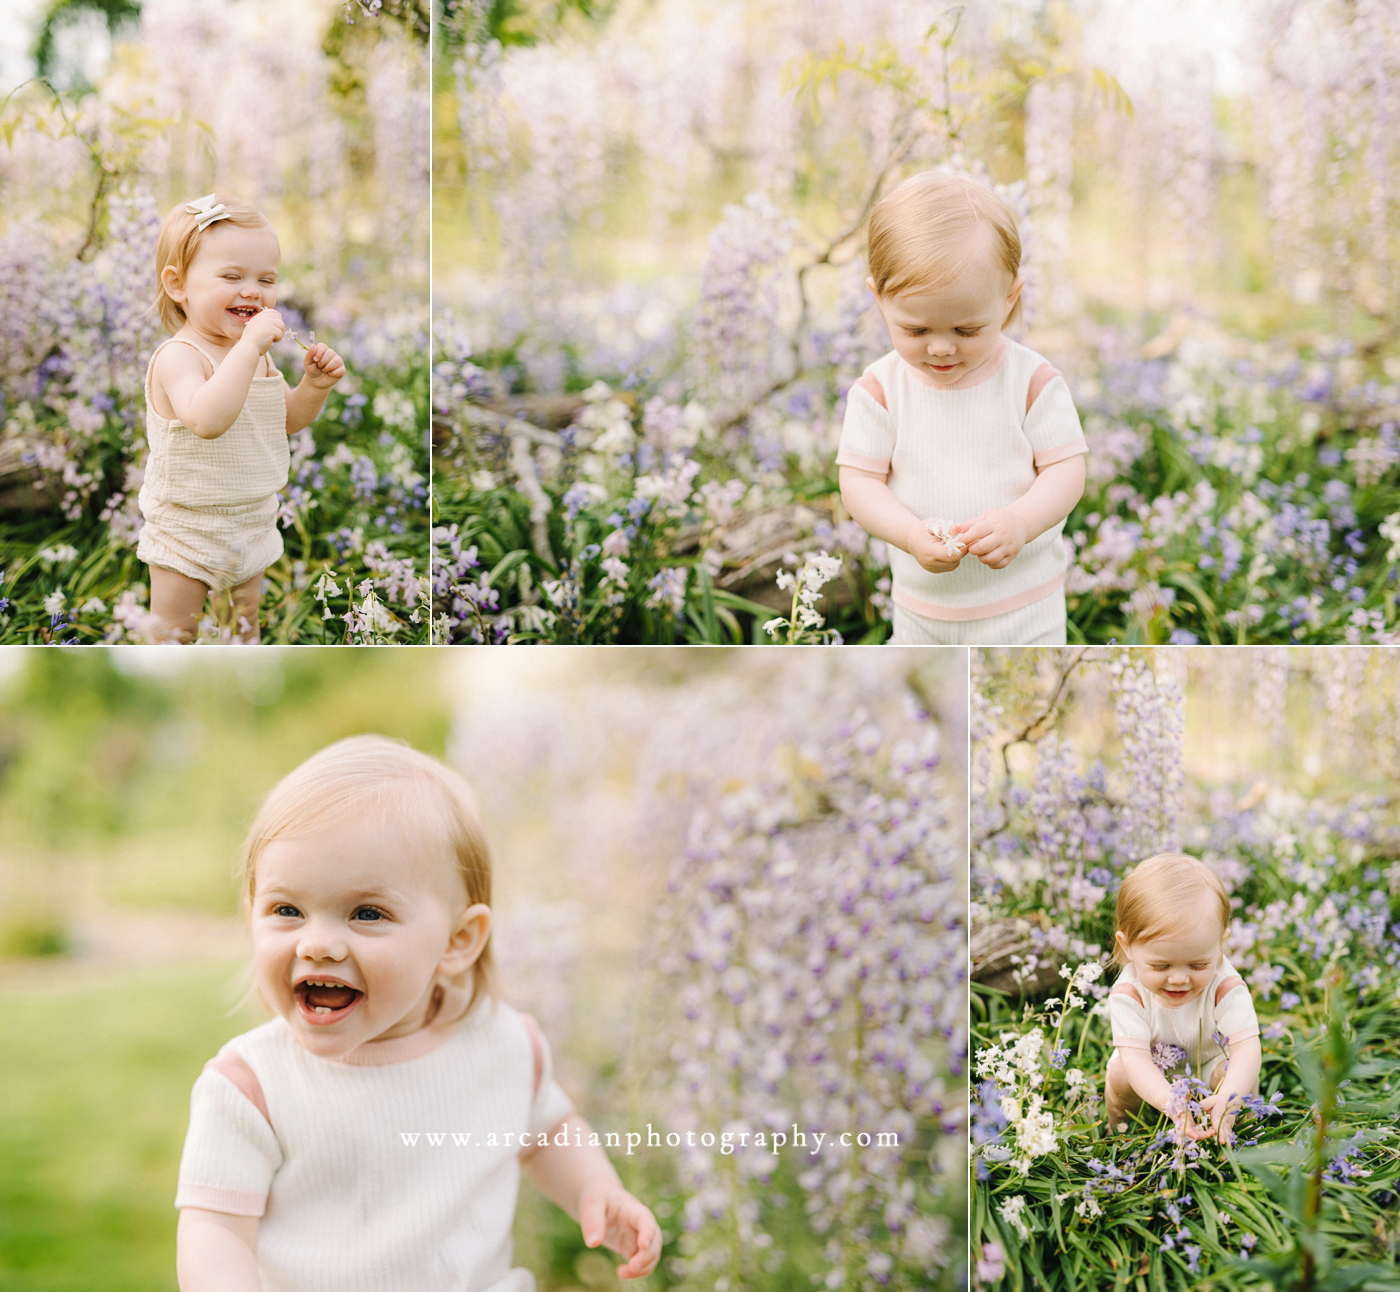 Outdoor spring one-year photos at the wisteria in Bush Park